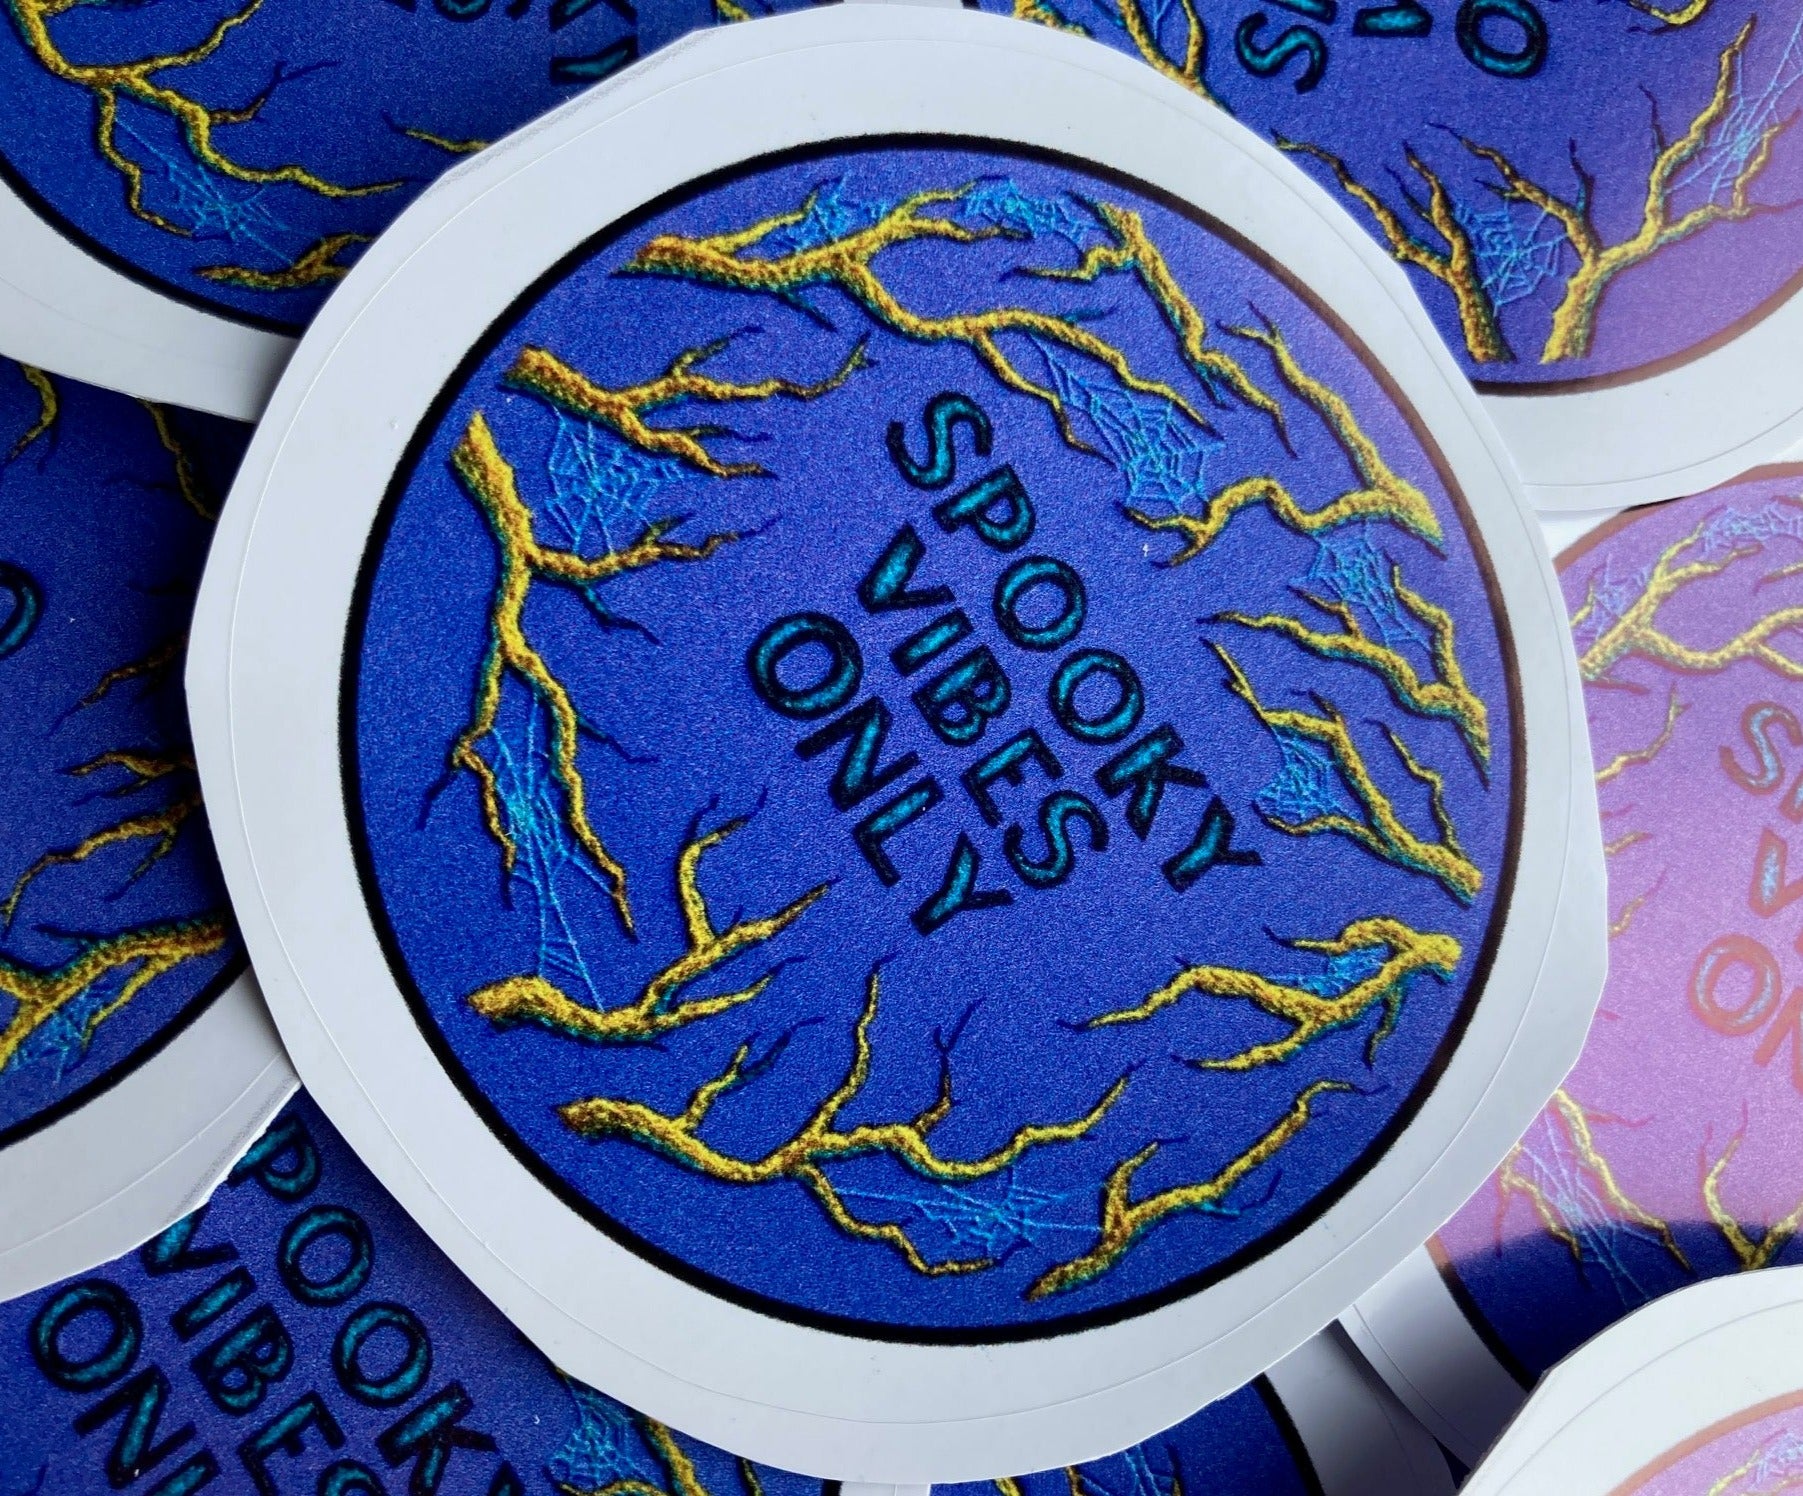 a pile of stickers lays on a dark surface. The stickers depict an embroidery of golden branches on a deep periwinkle blue background and the words SPOOKY VIBES ONLY in the center.